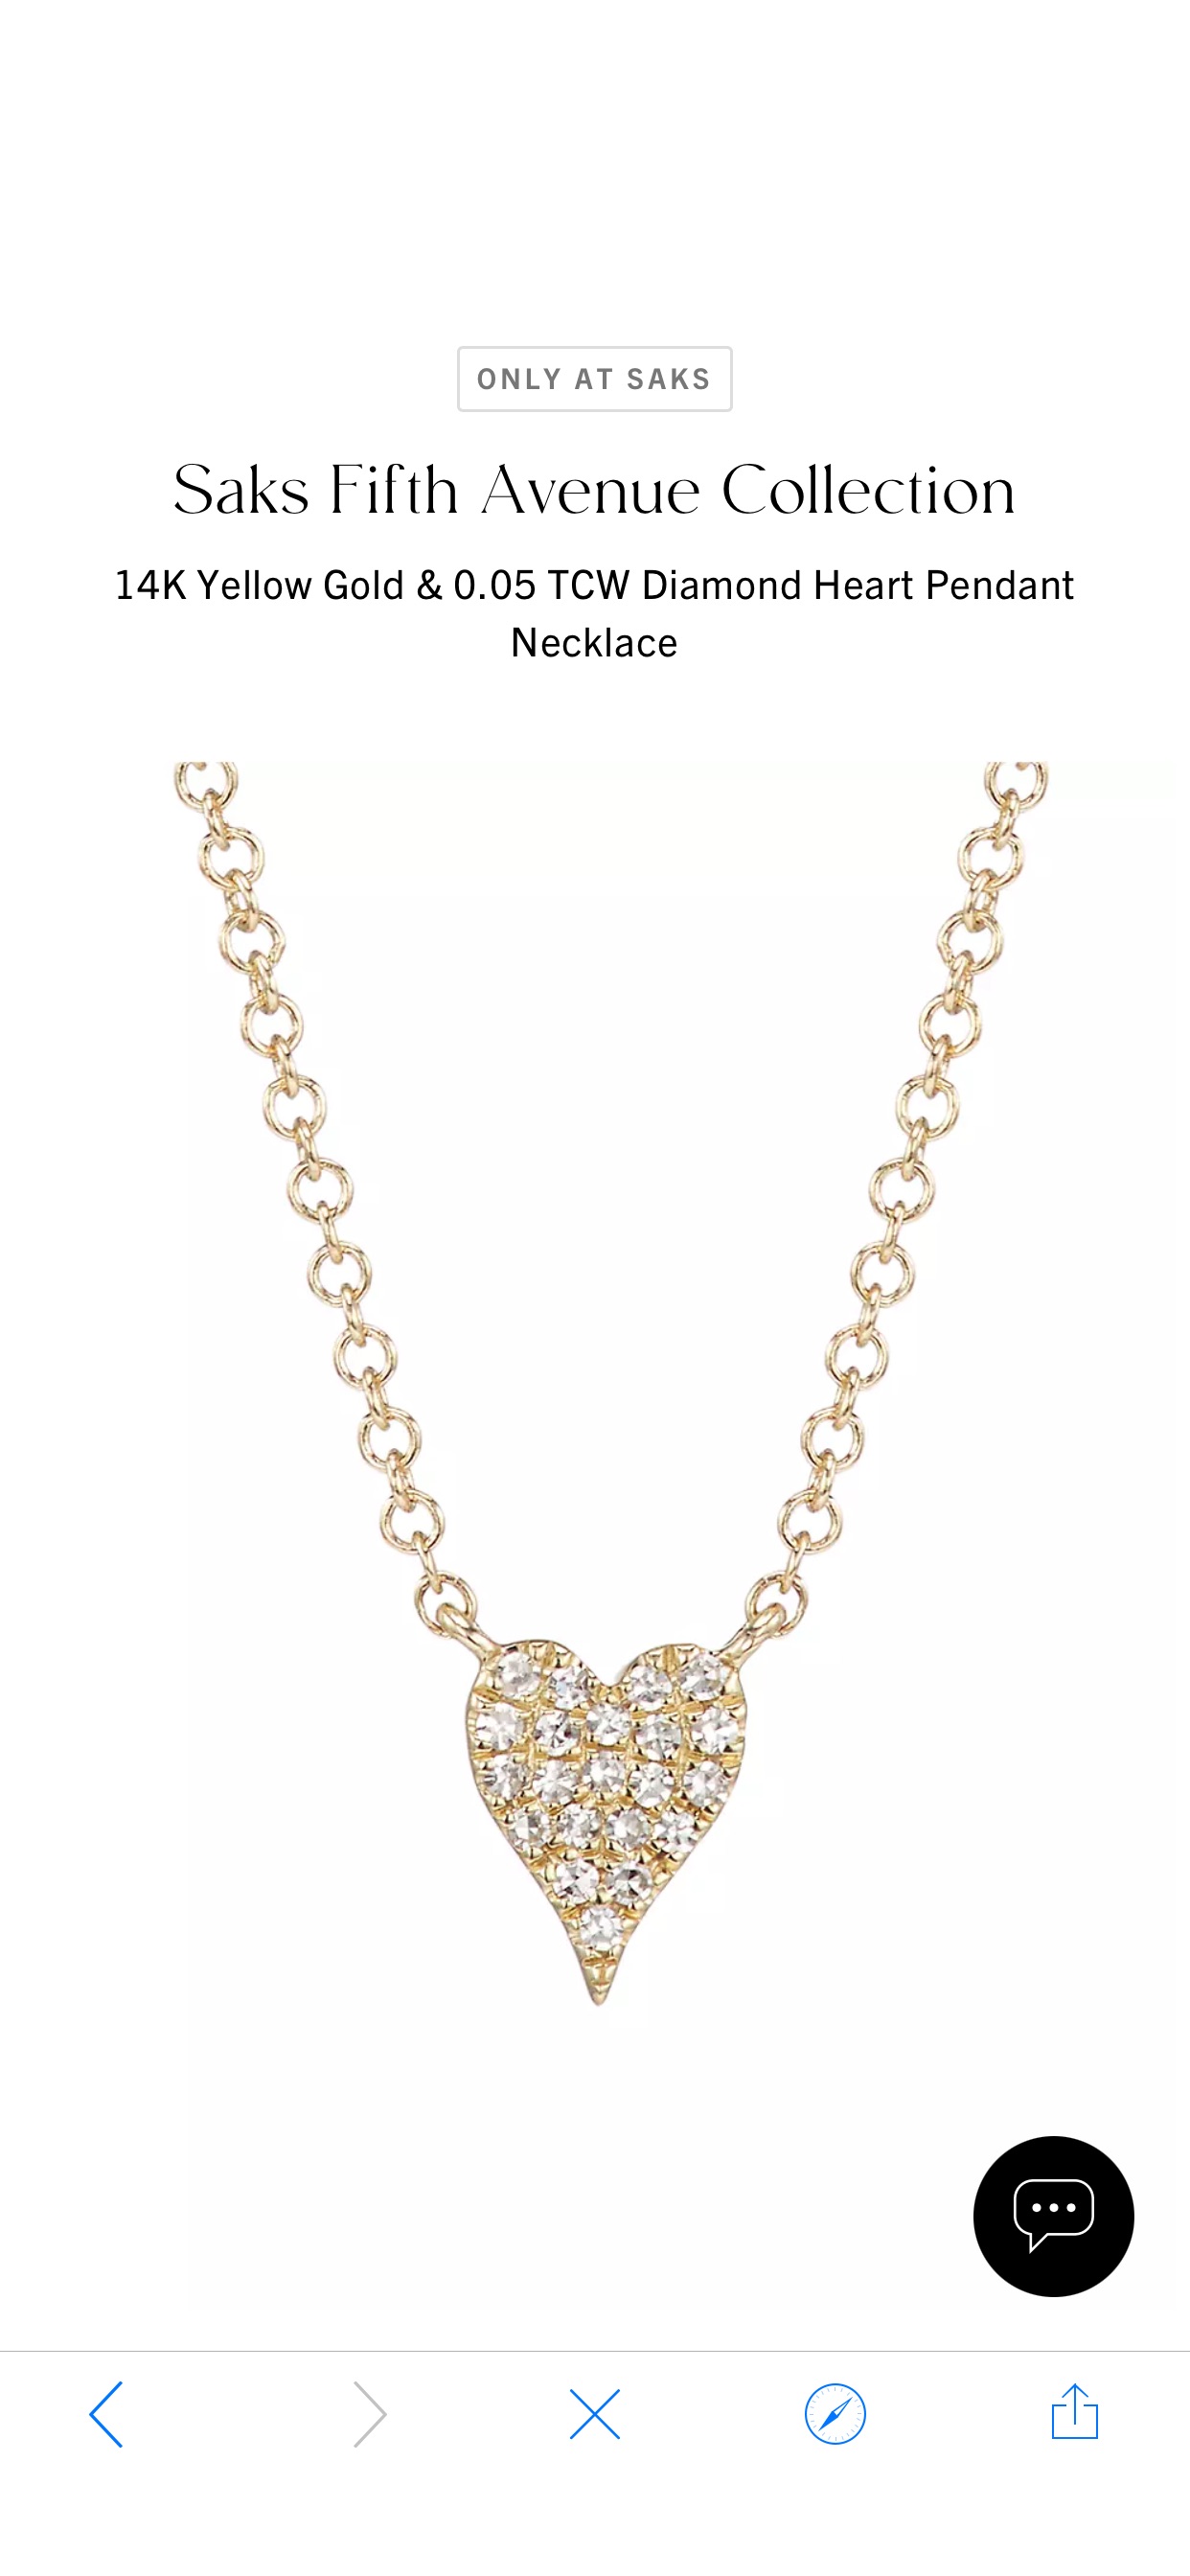 Shop Saks Fifth Avenue Collection 14K Yellow Gold & 0.05 TCW Diamond Heart Pendant Necklace | Saks Fifth Avenue